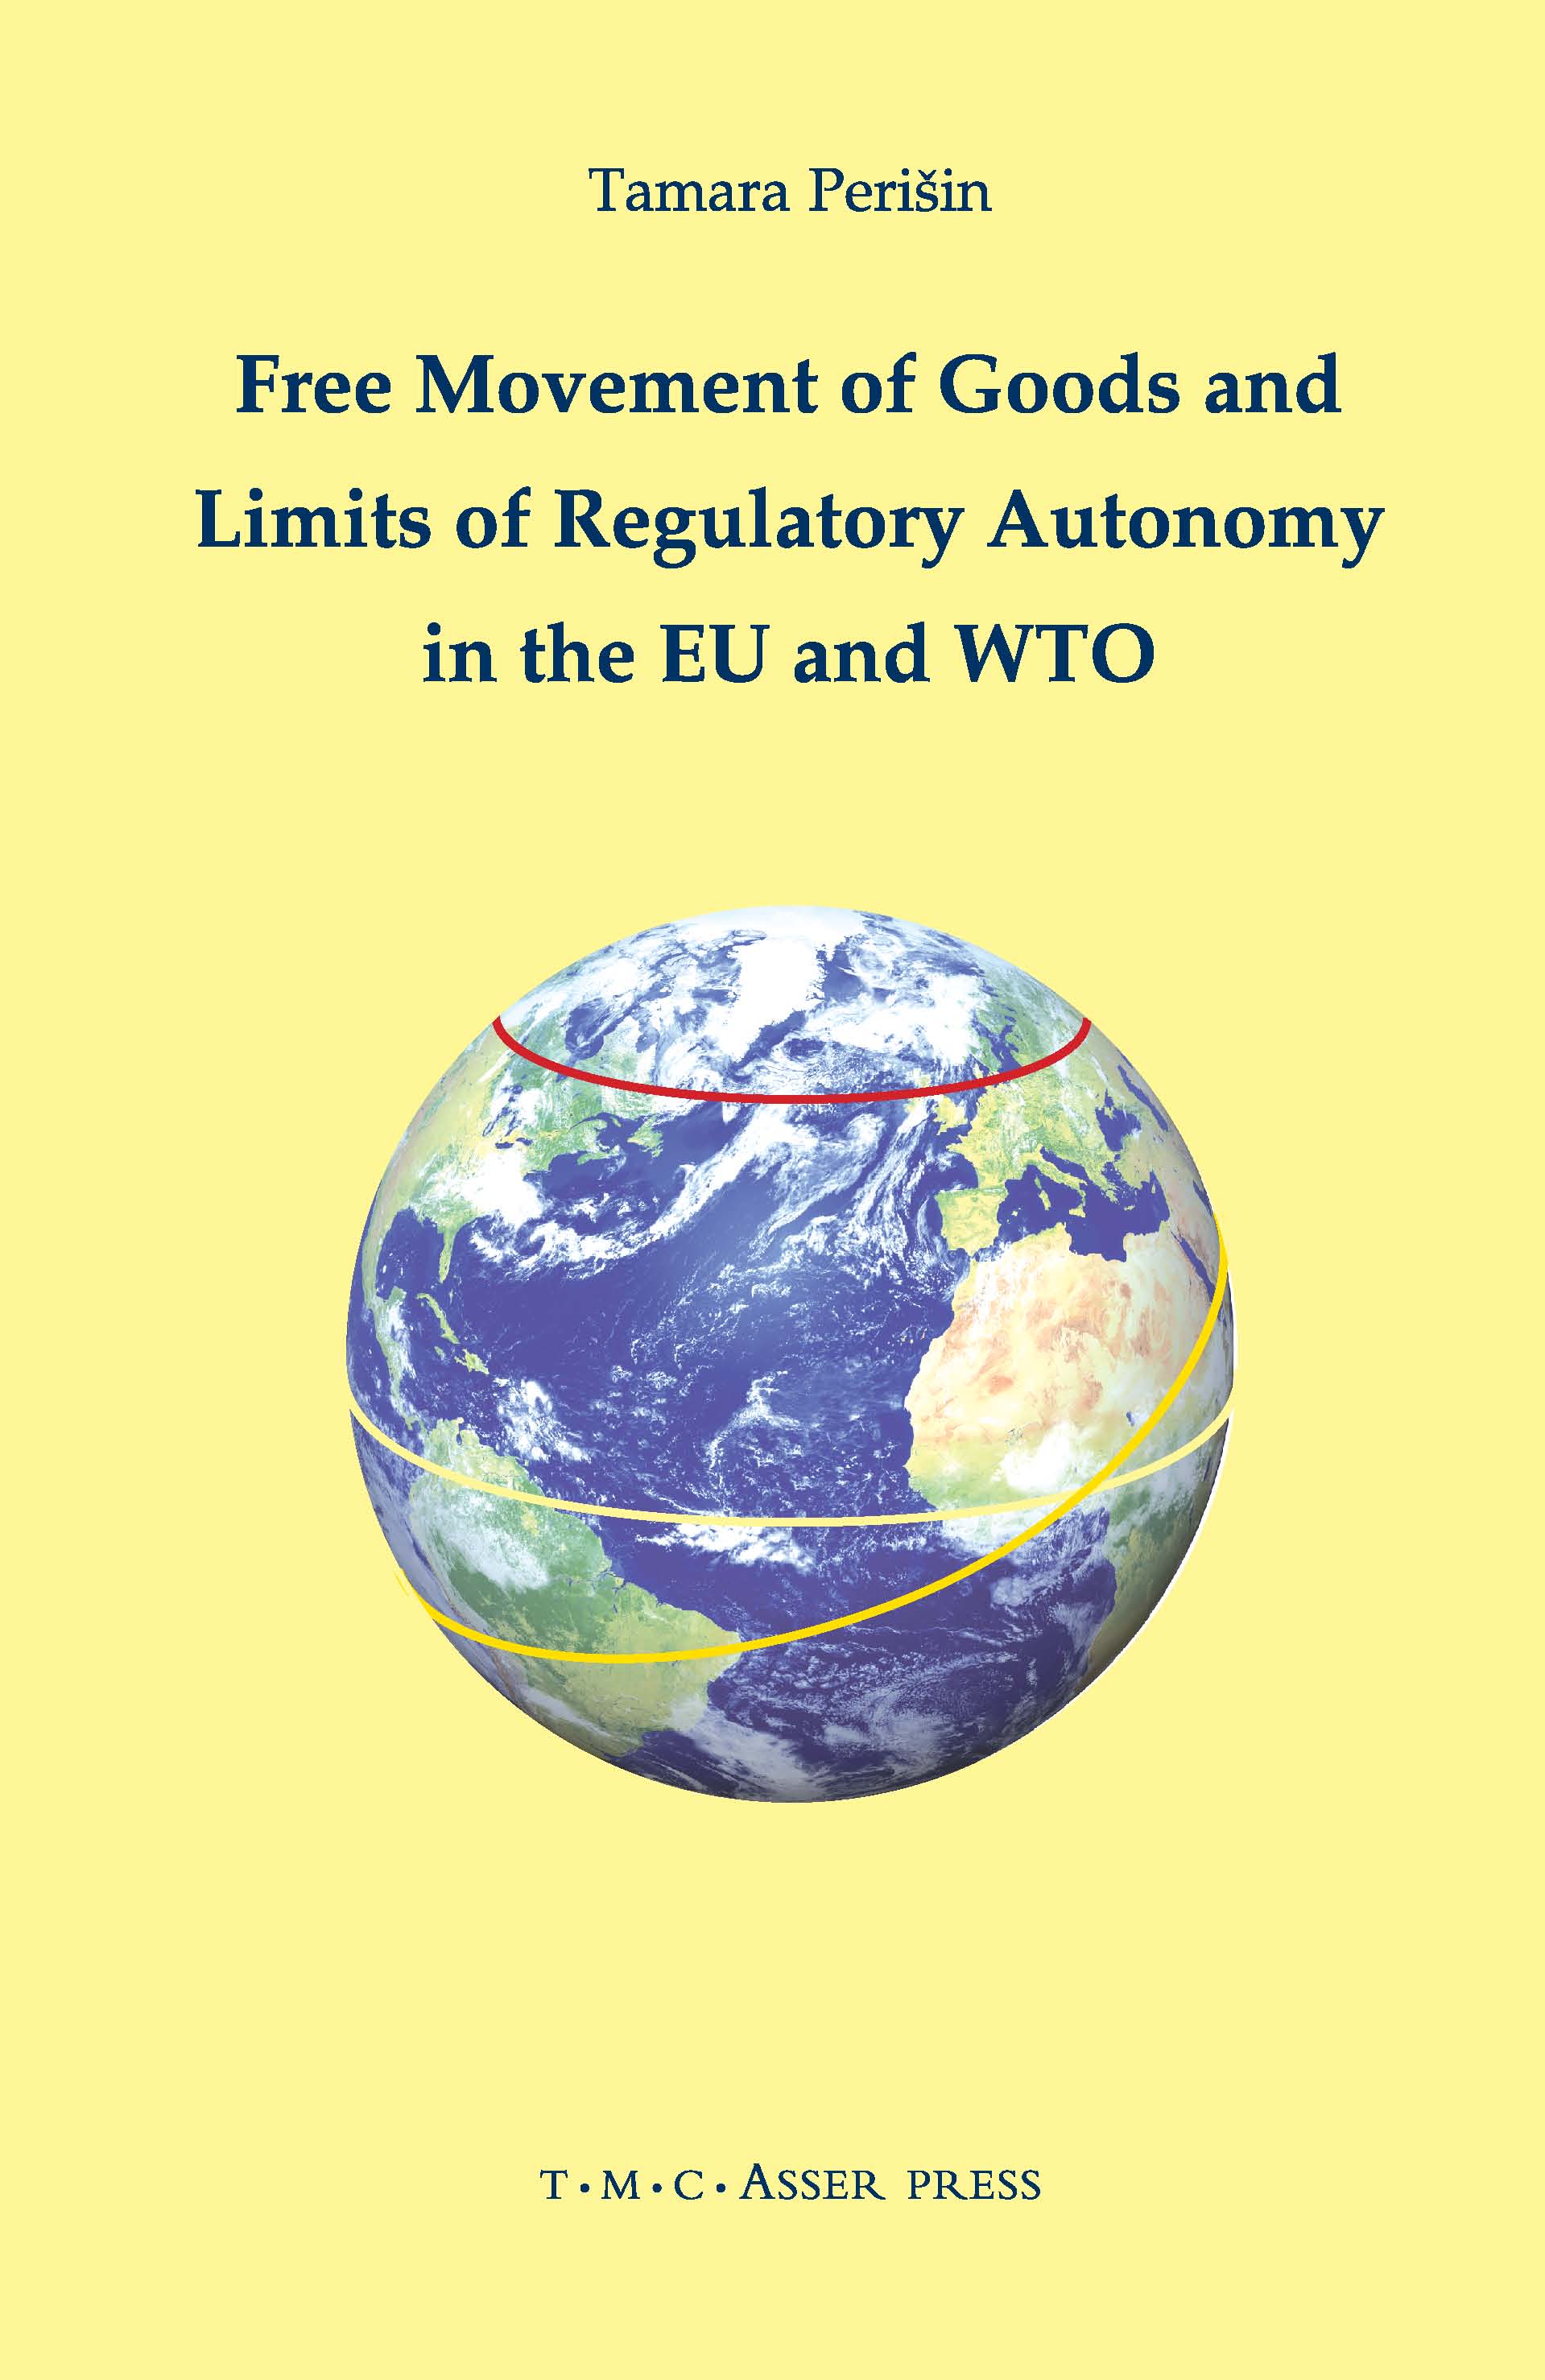 Free Movement of Goods and Limits of Regulatory Autonomy in the EU and WTO